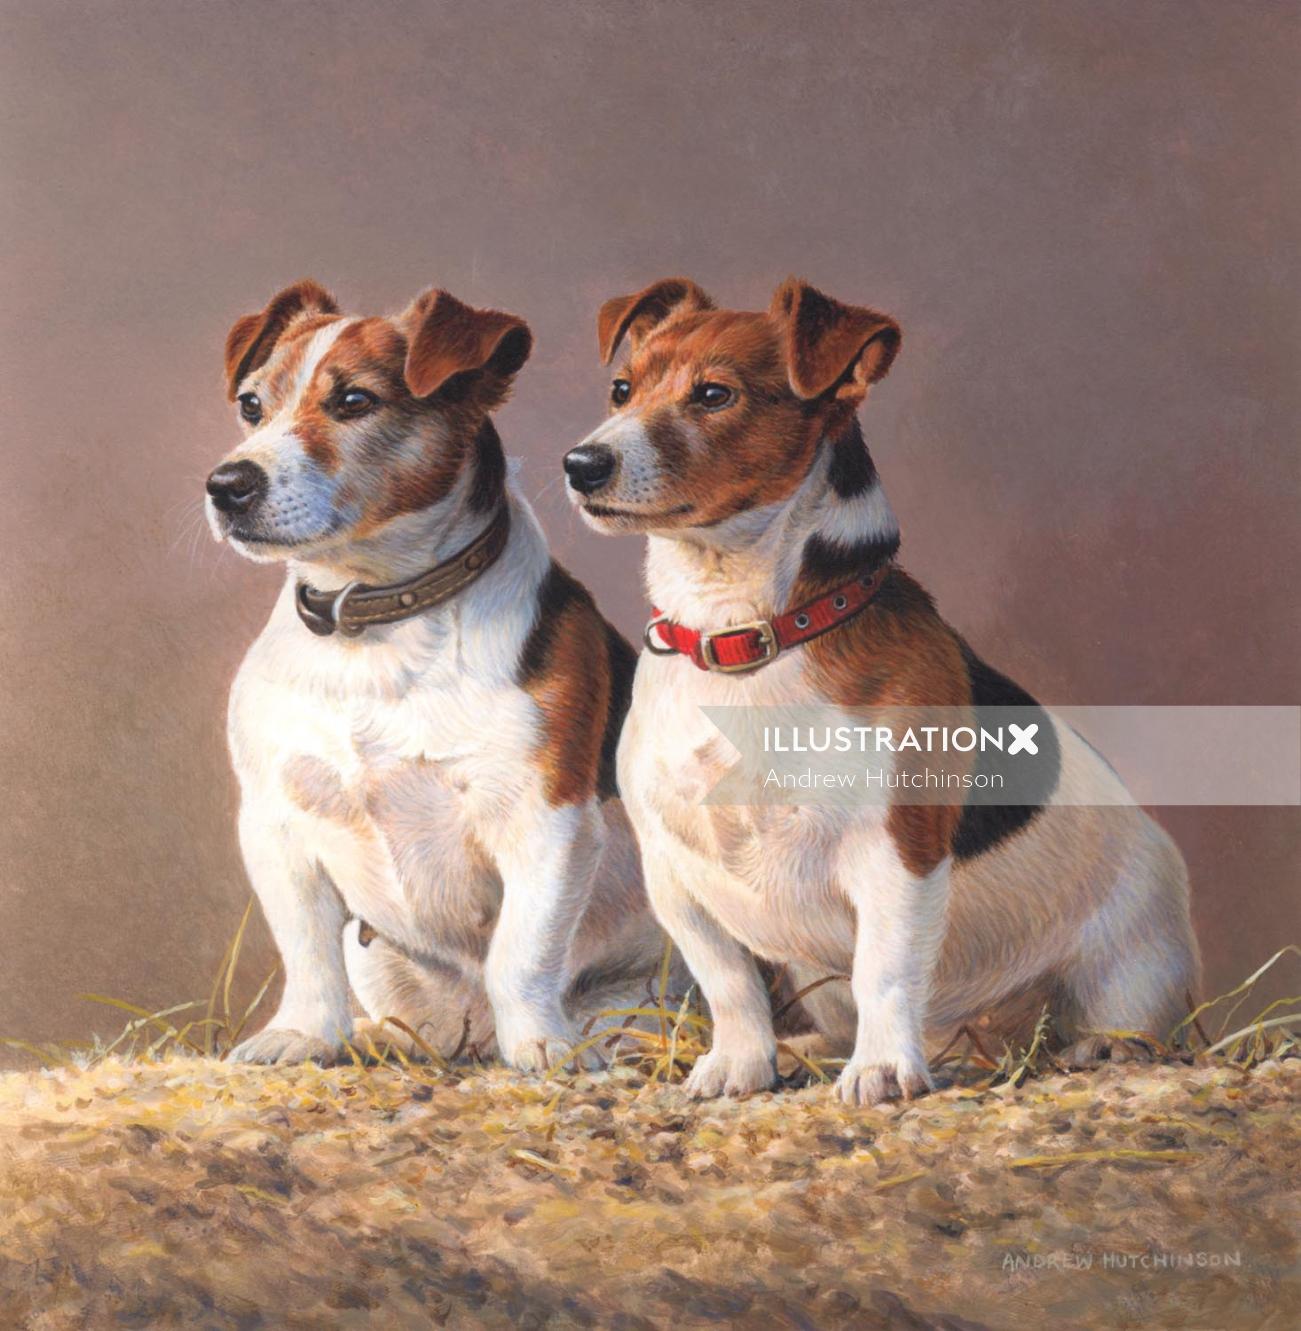 Illustration of jack russell dogs © Andrew Hutchinson